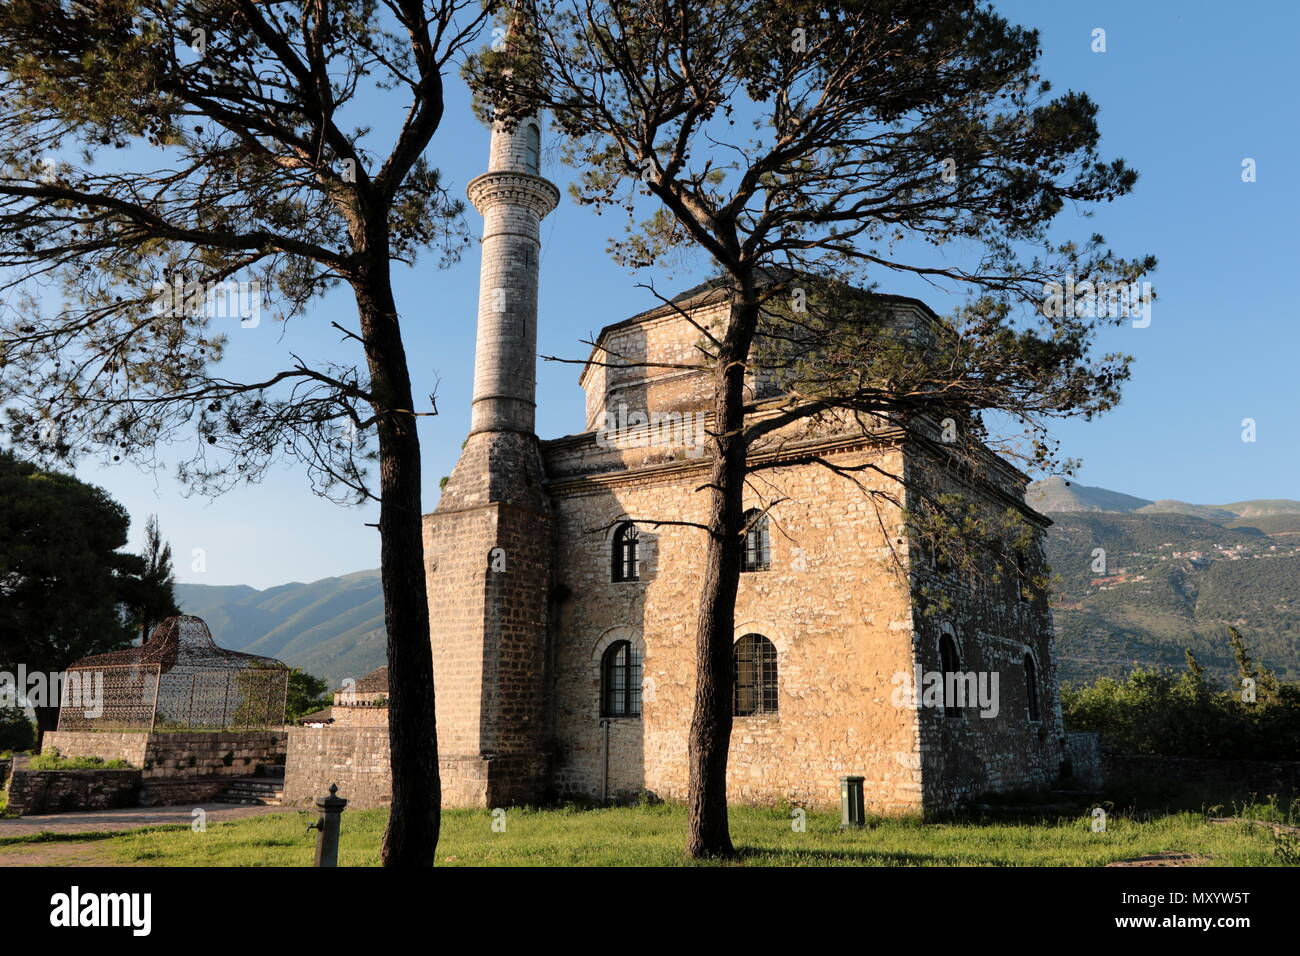 The Fethiye Mosque with the Tomb of Ali Pasha in the Inner Citadel (Its Kale) of the city of Ioannina, Greece. Stock Photo